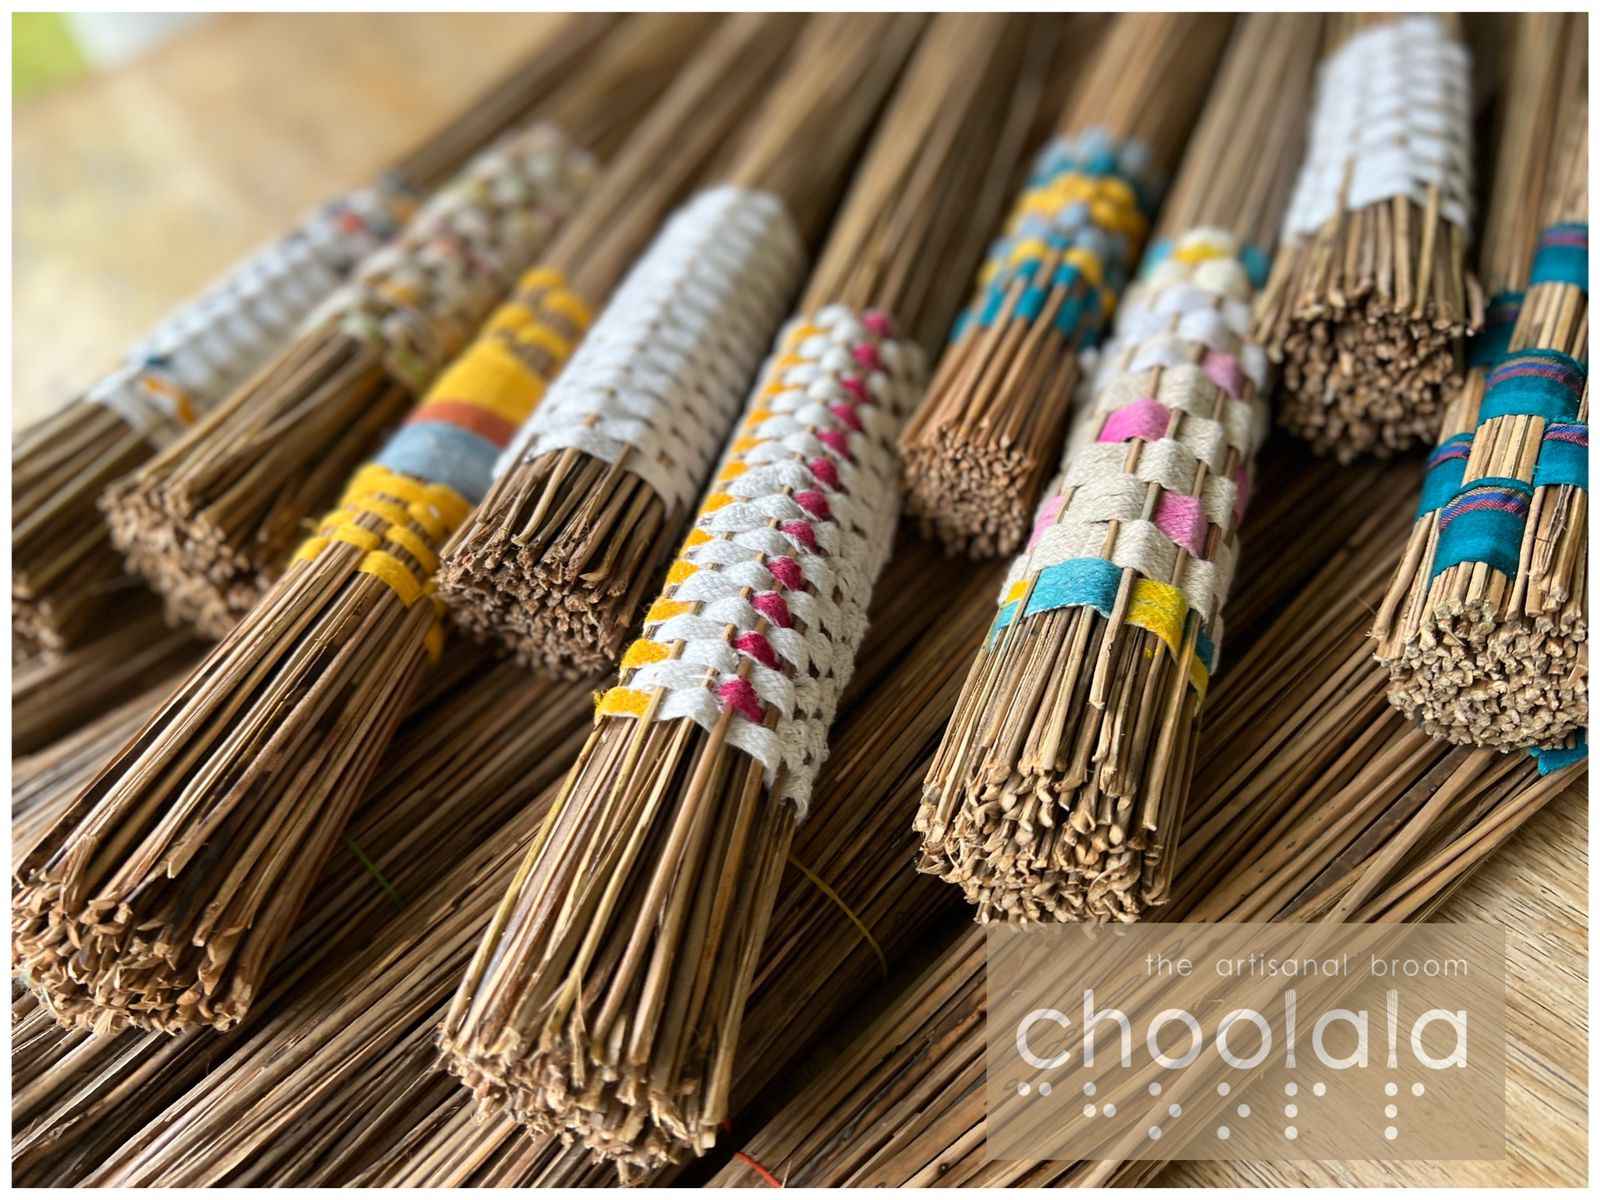 The broomsticks made by the visually impaired women at Choolala